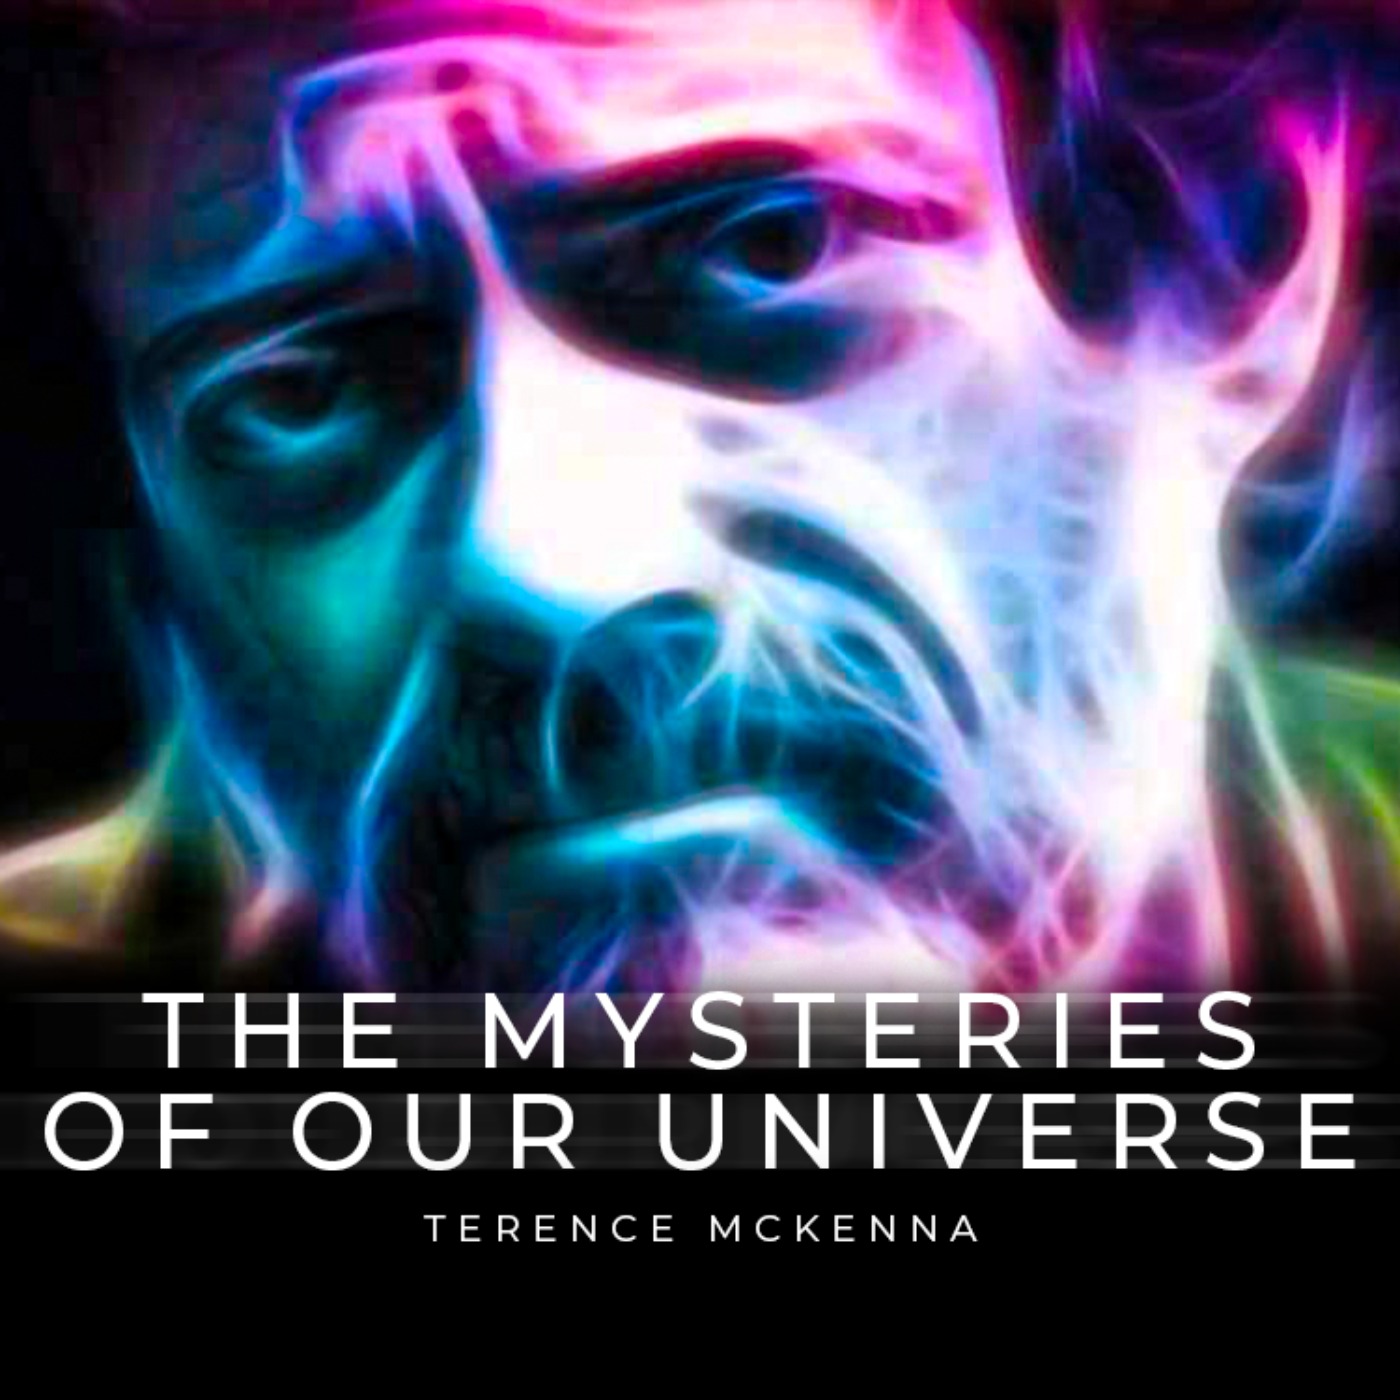 Will People Ever Understand? - Terence McKenna On The Mysteries Of Our Universe